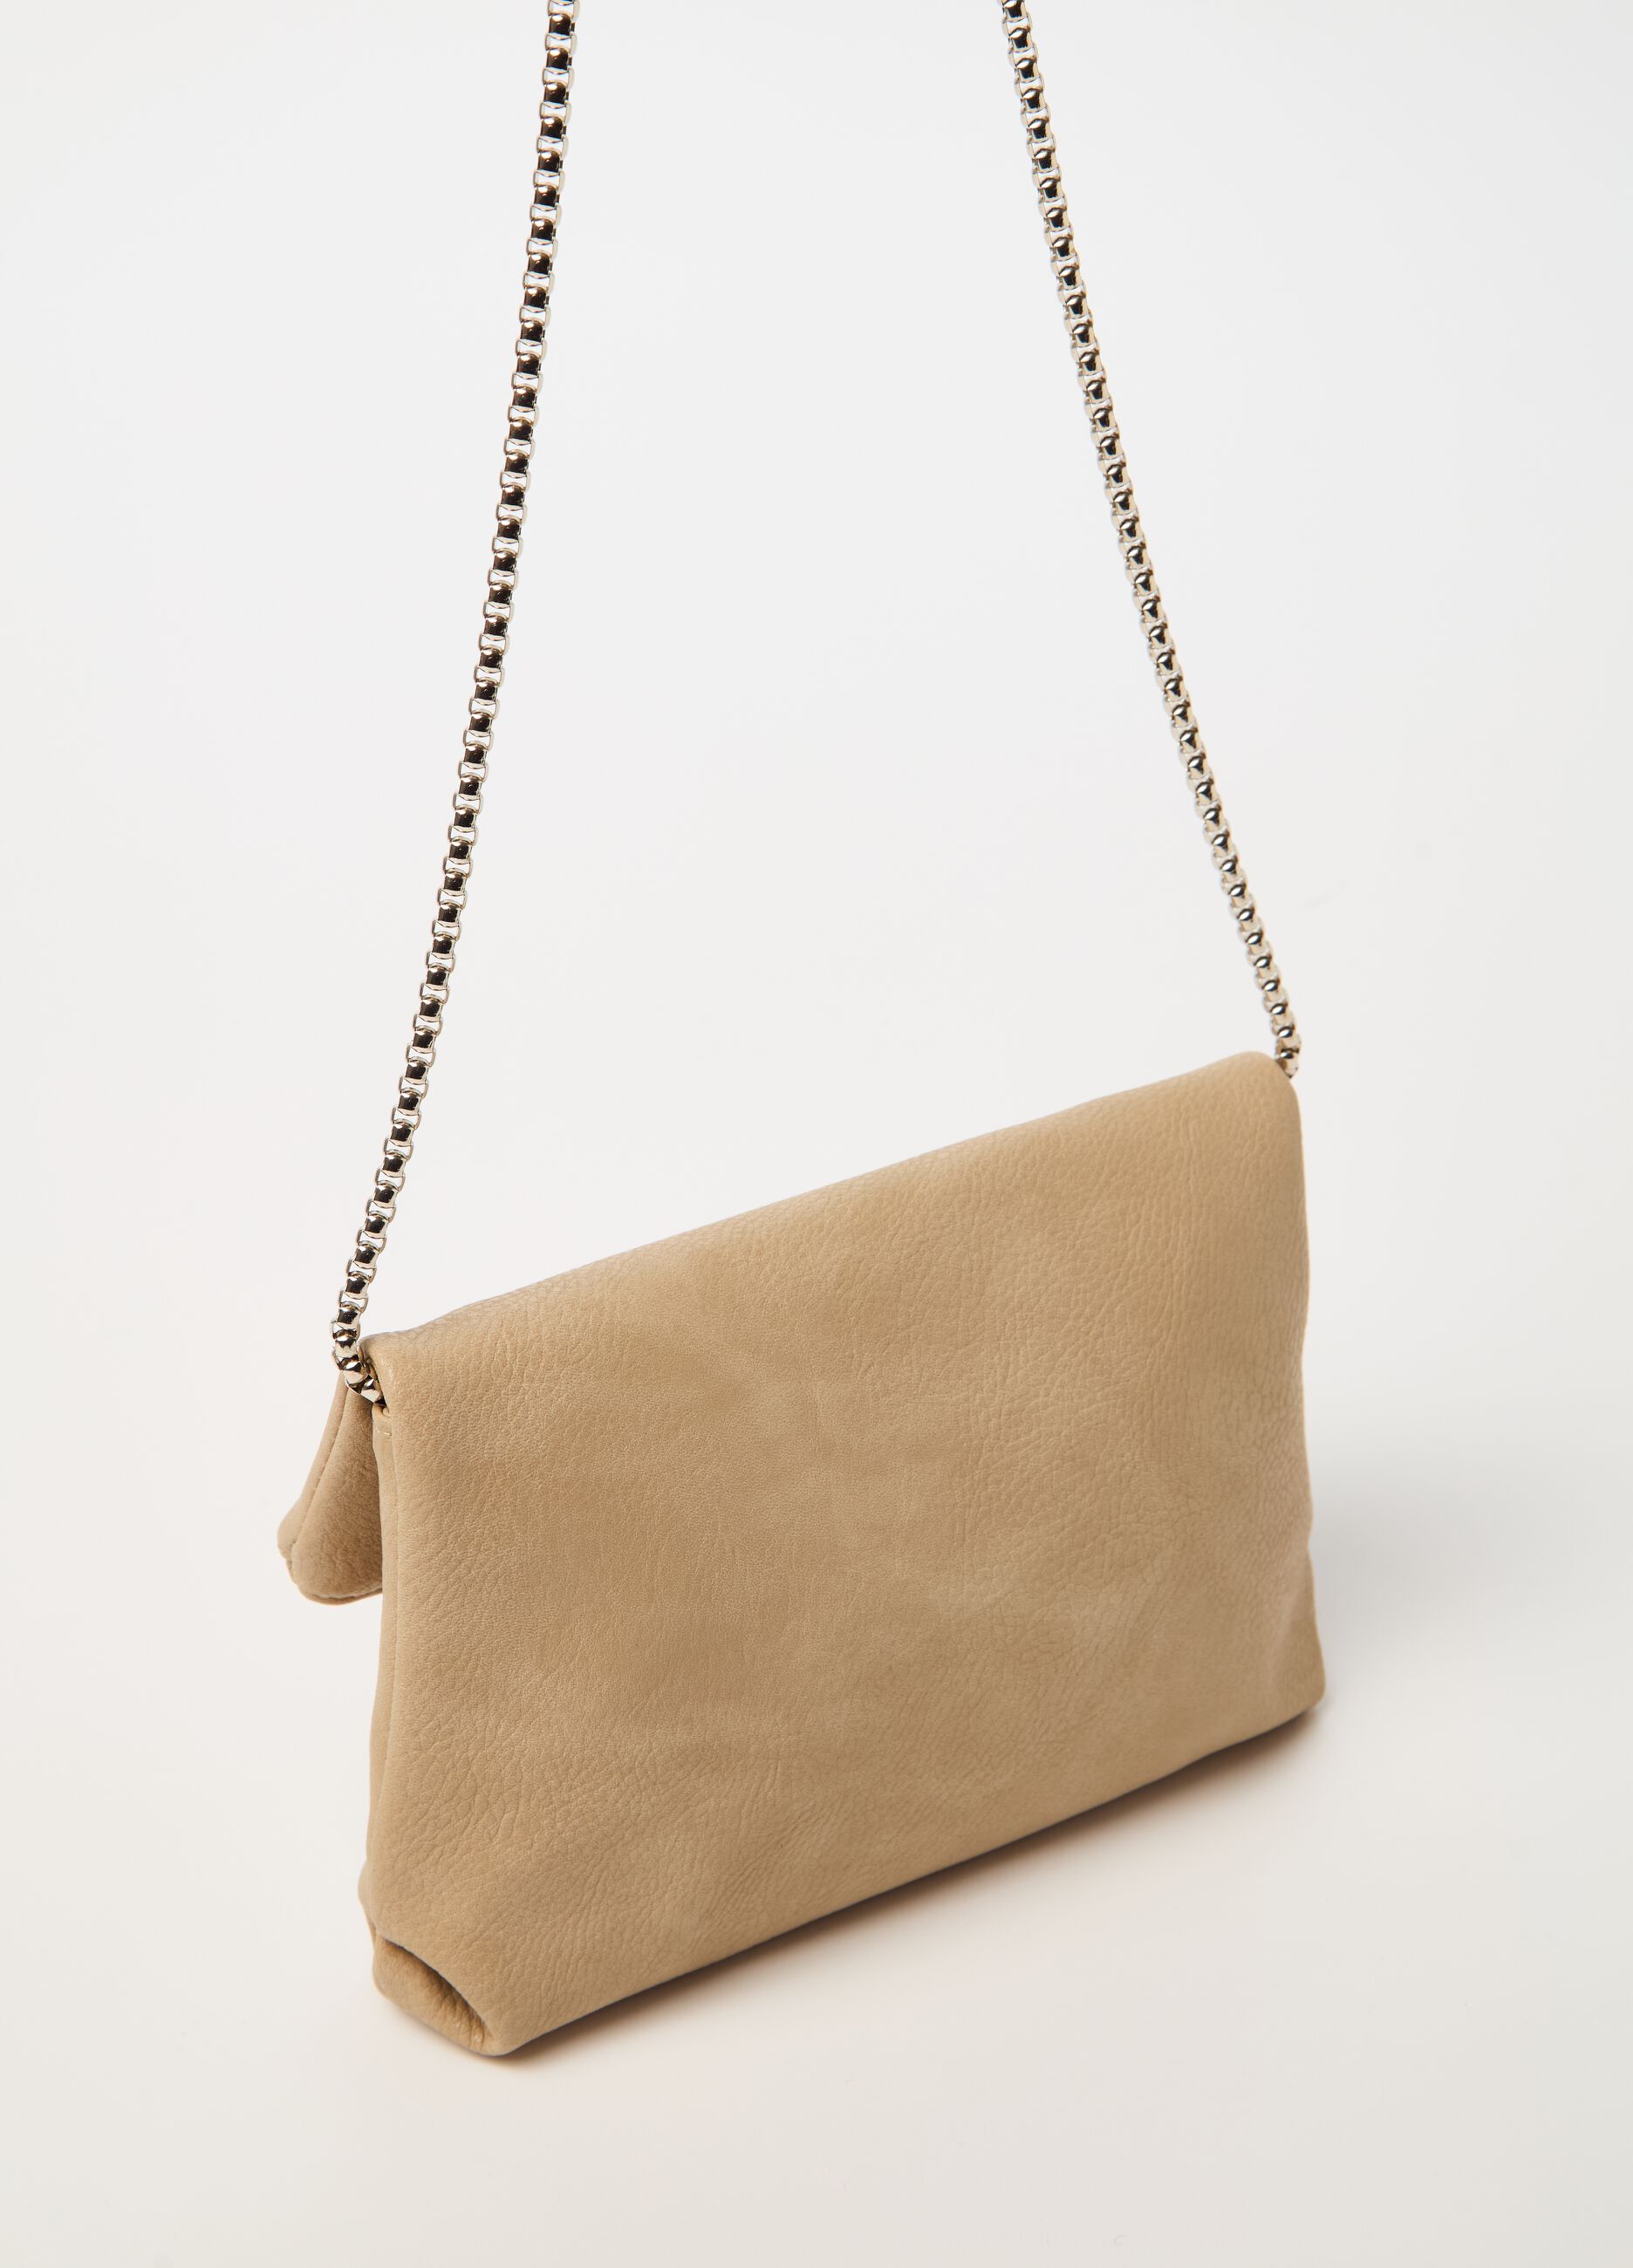 Bag with flap and chain strap